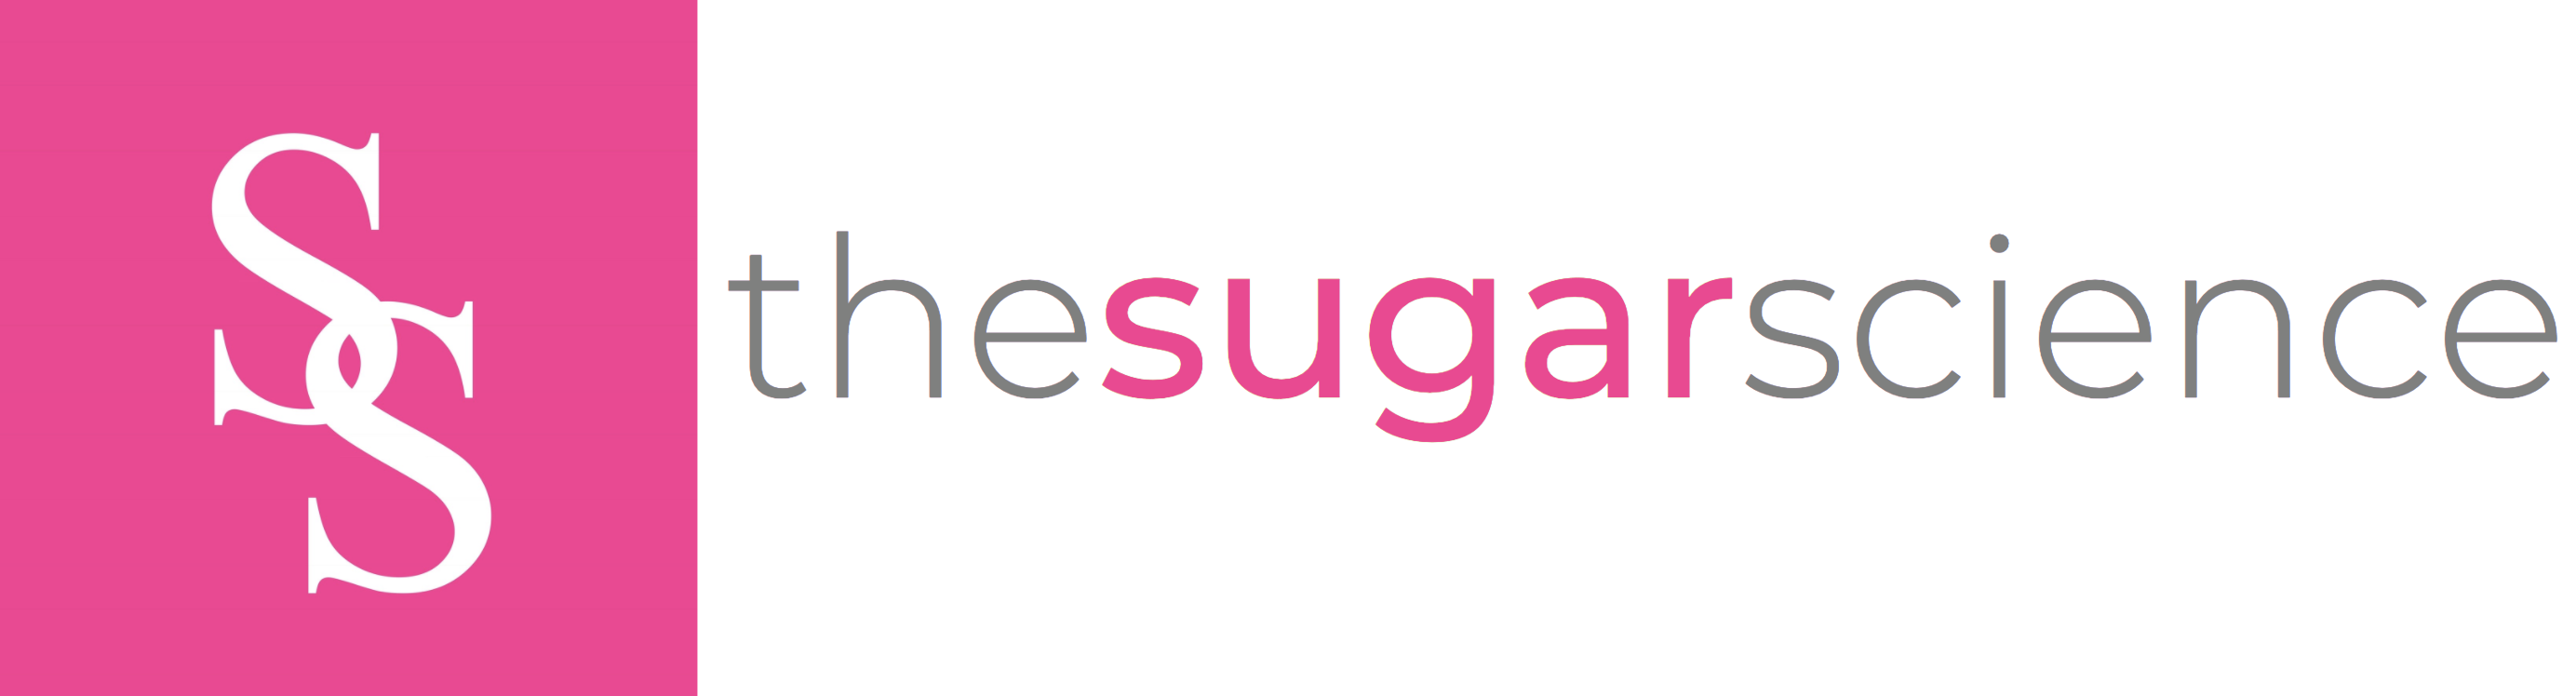 TheSugarScience Podcast- curating the scientific conversation in type 1 diabetes